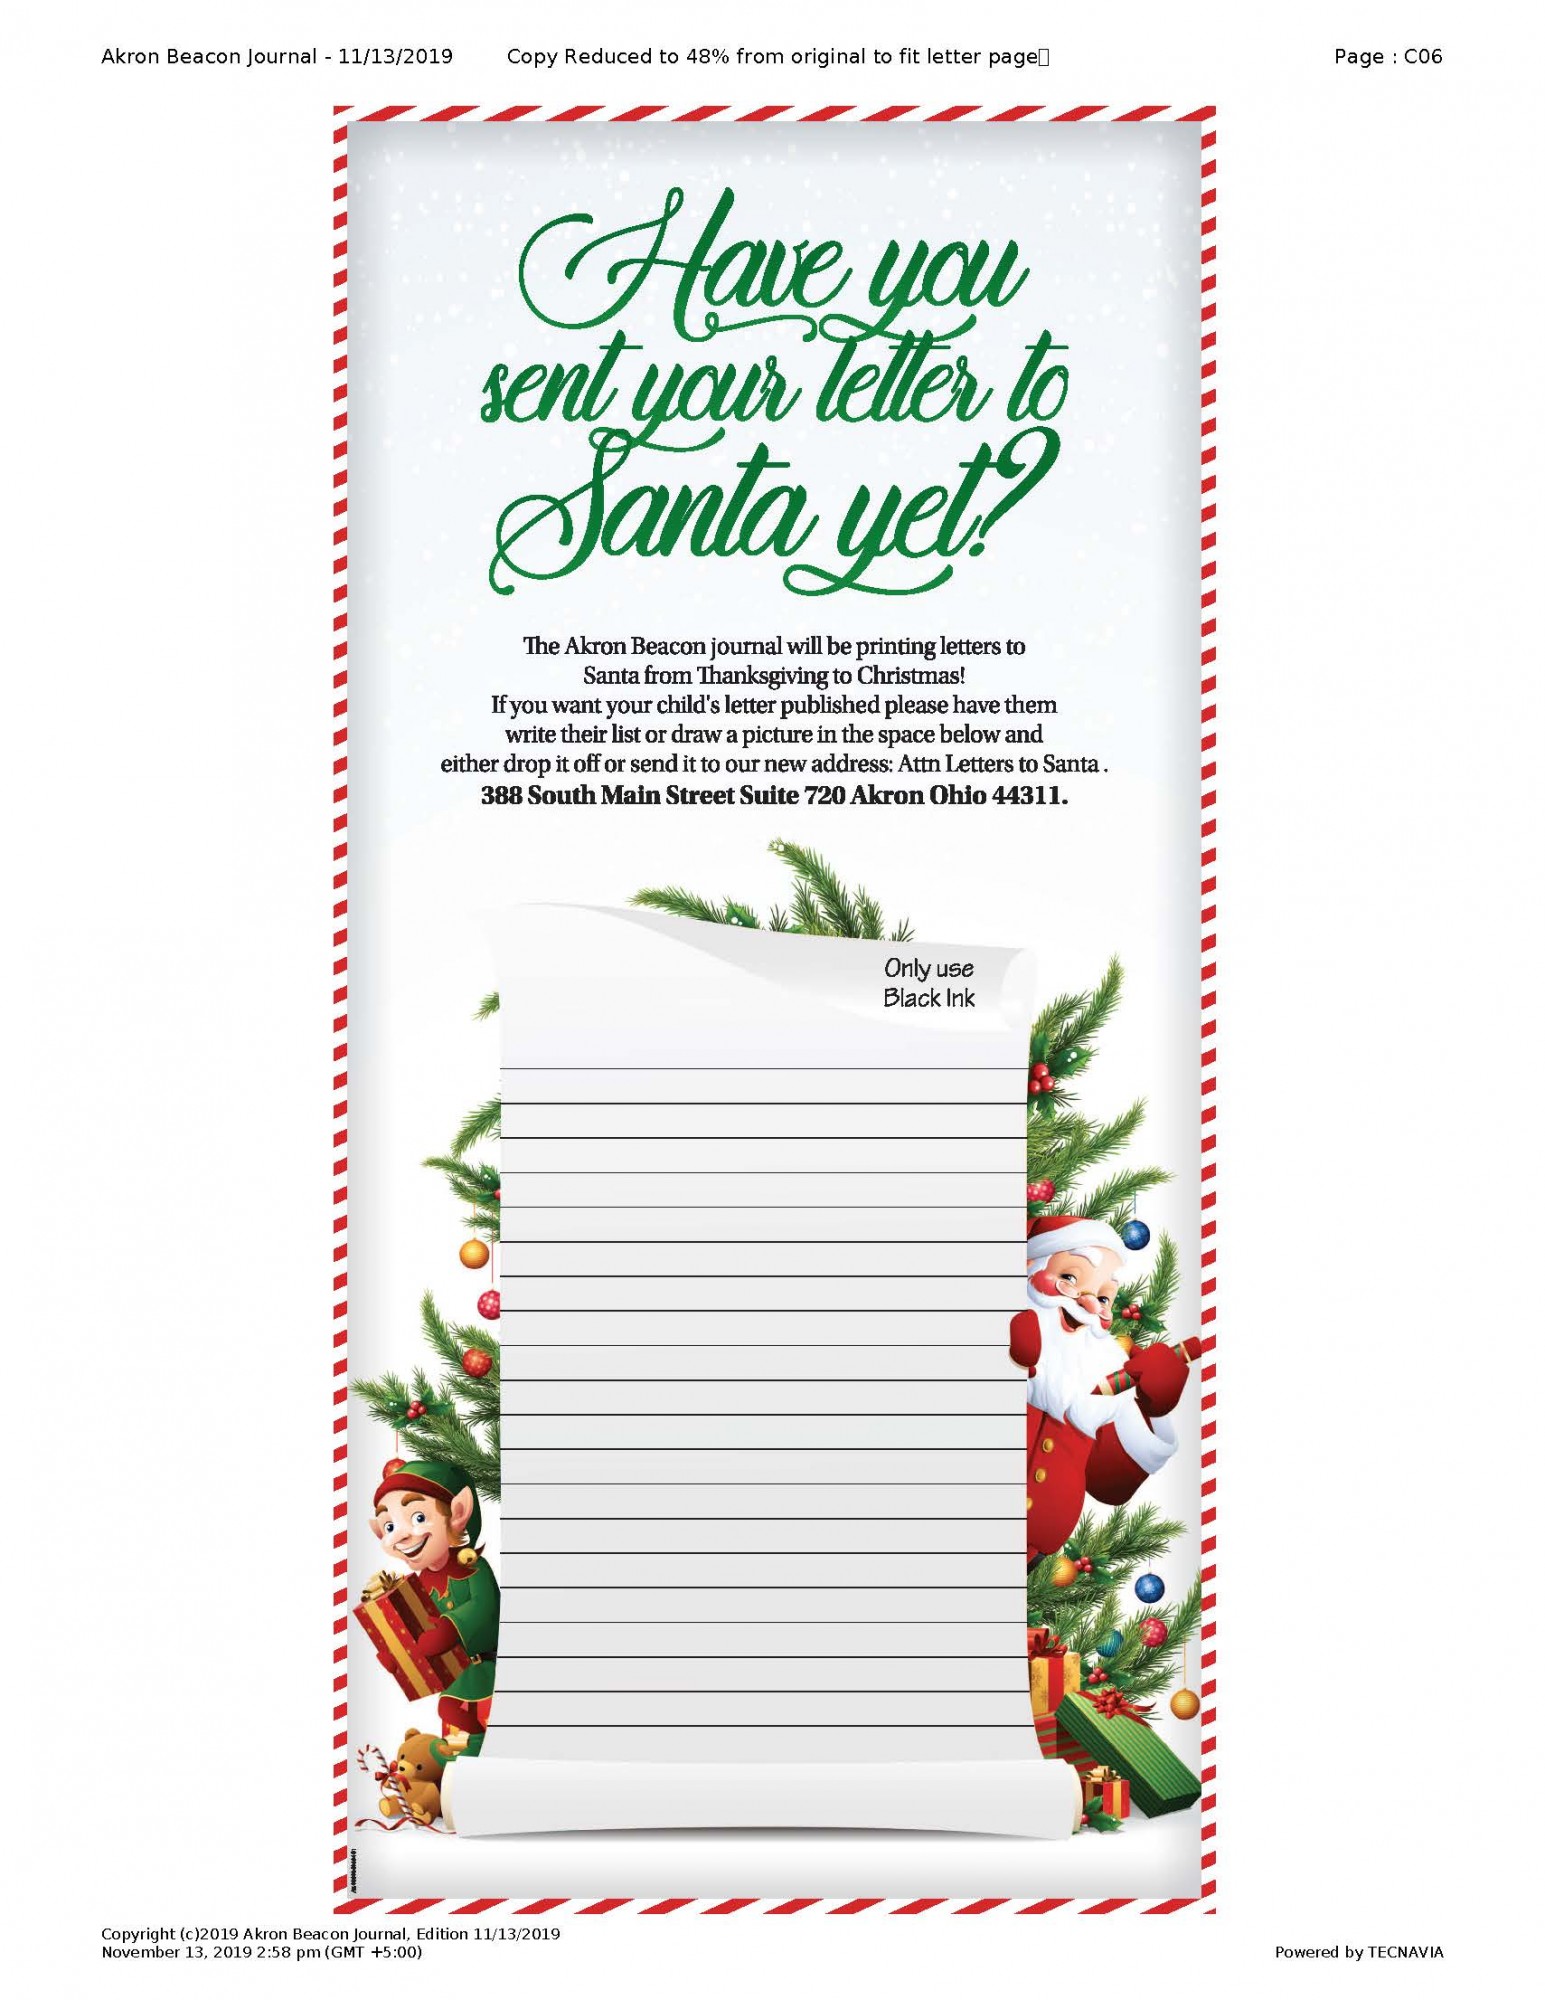 Have you sent your letter to Santa yet?